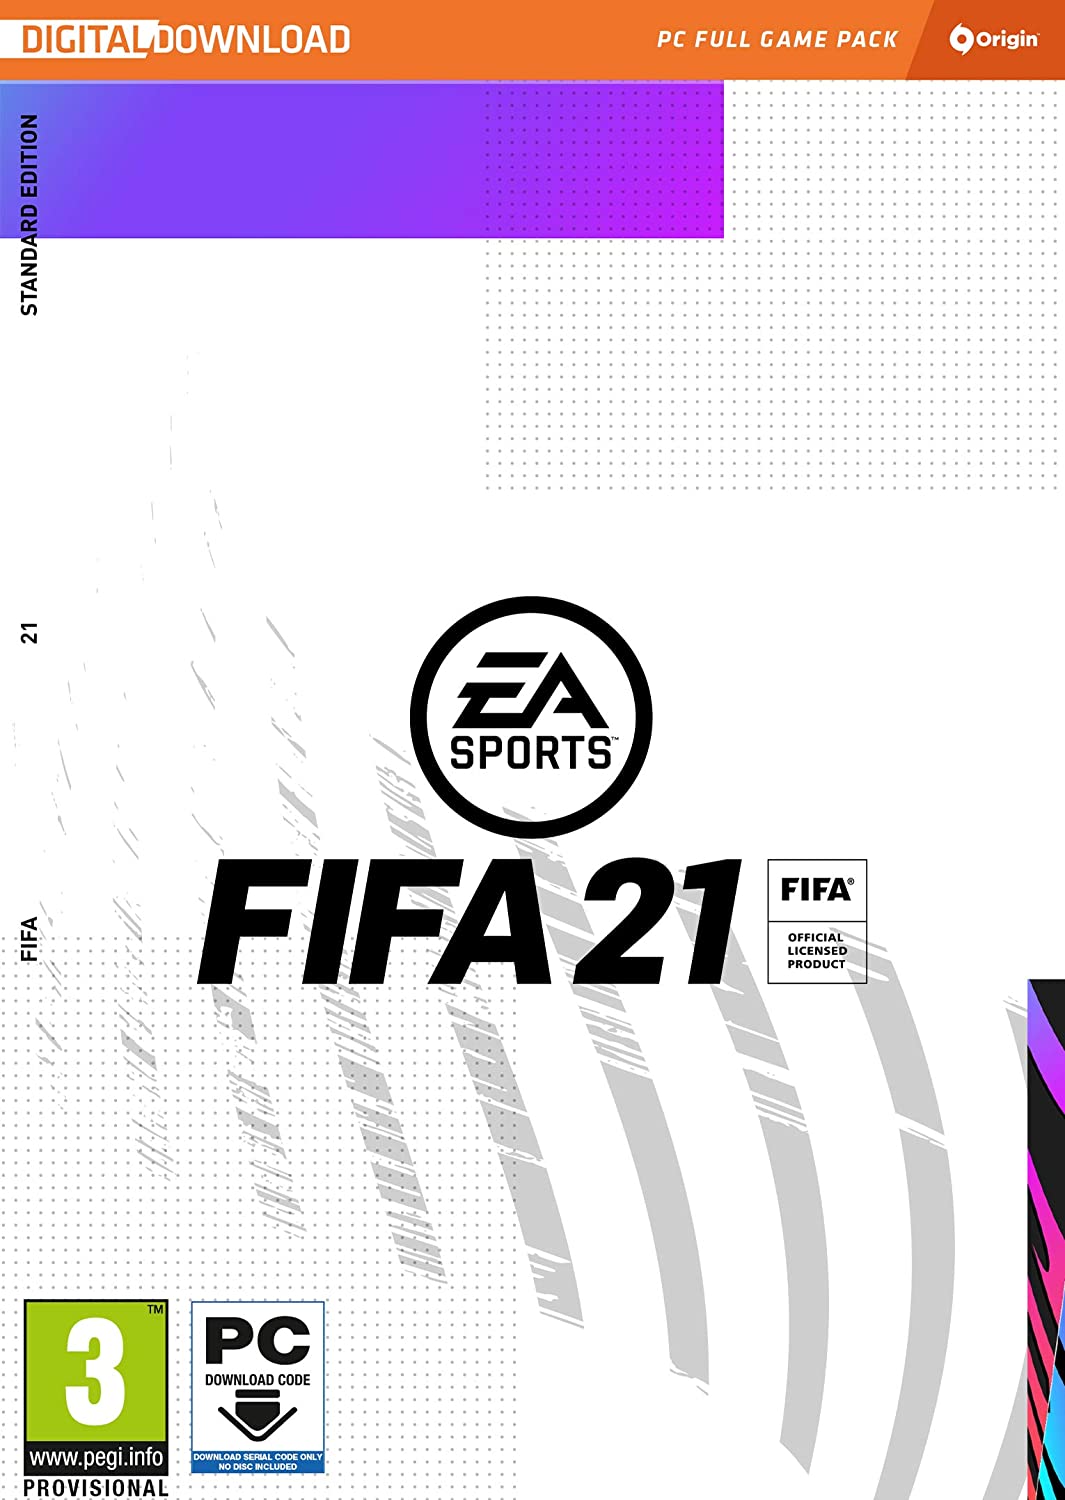 How to View/Find Fifa 23 product key/CD key activations on Steam